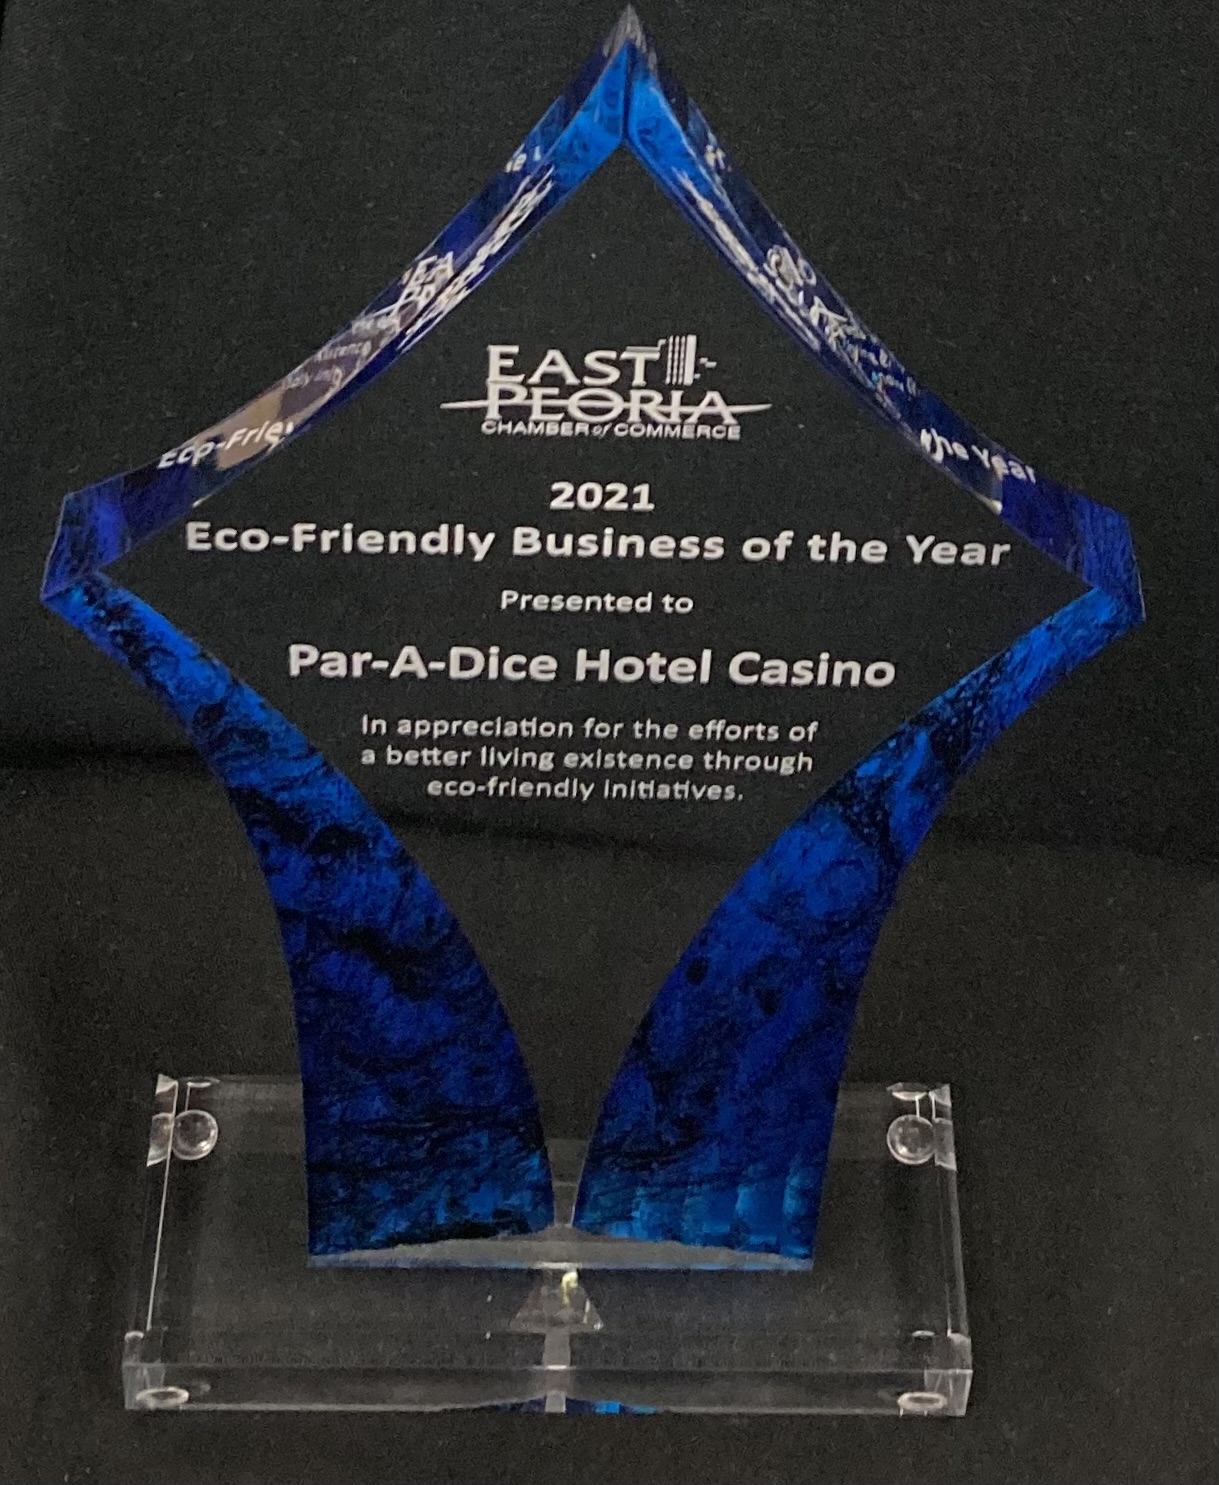 Eco-Friendly Business of the Year Award